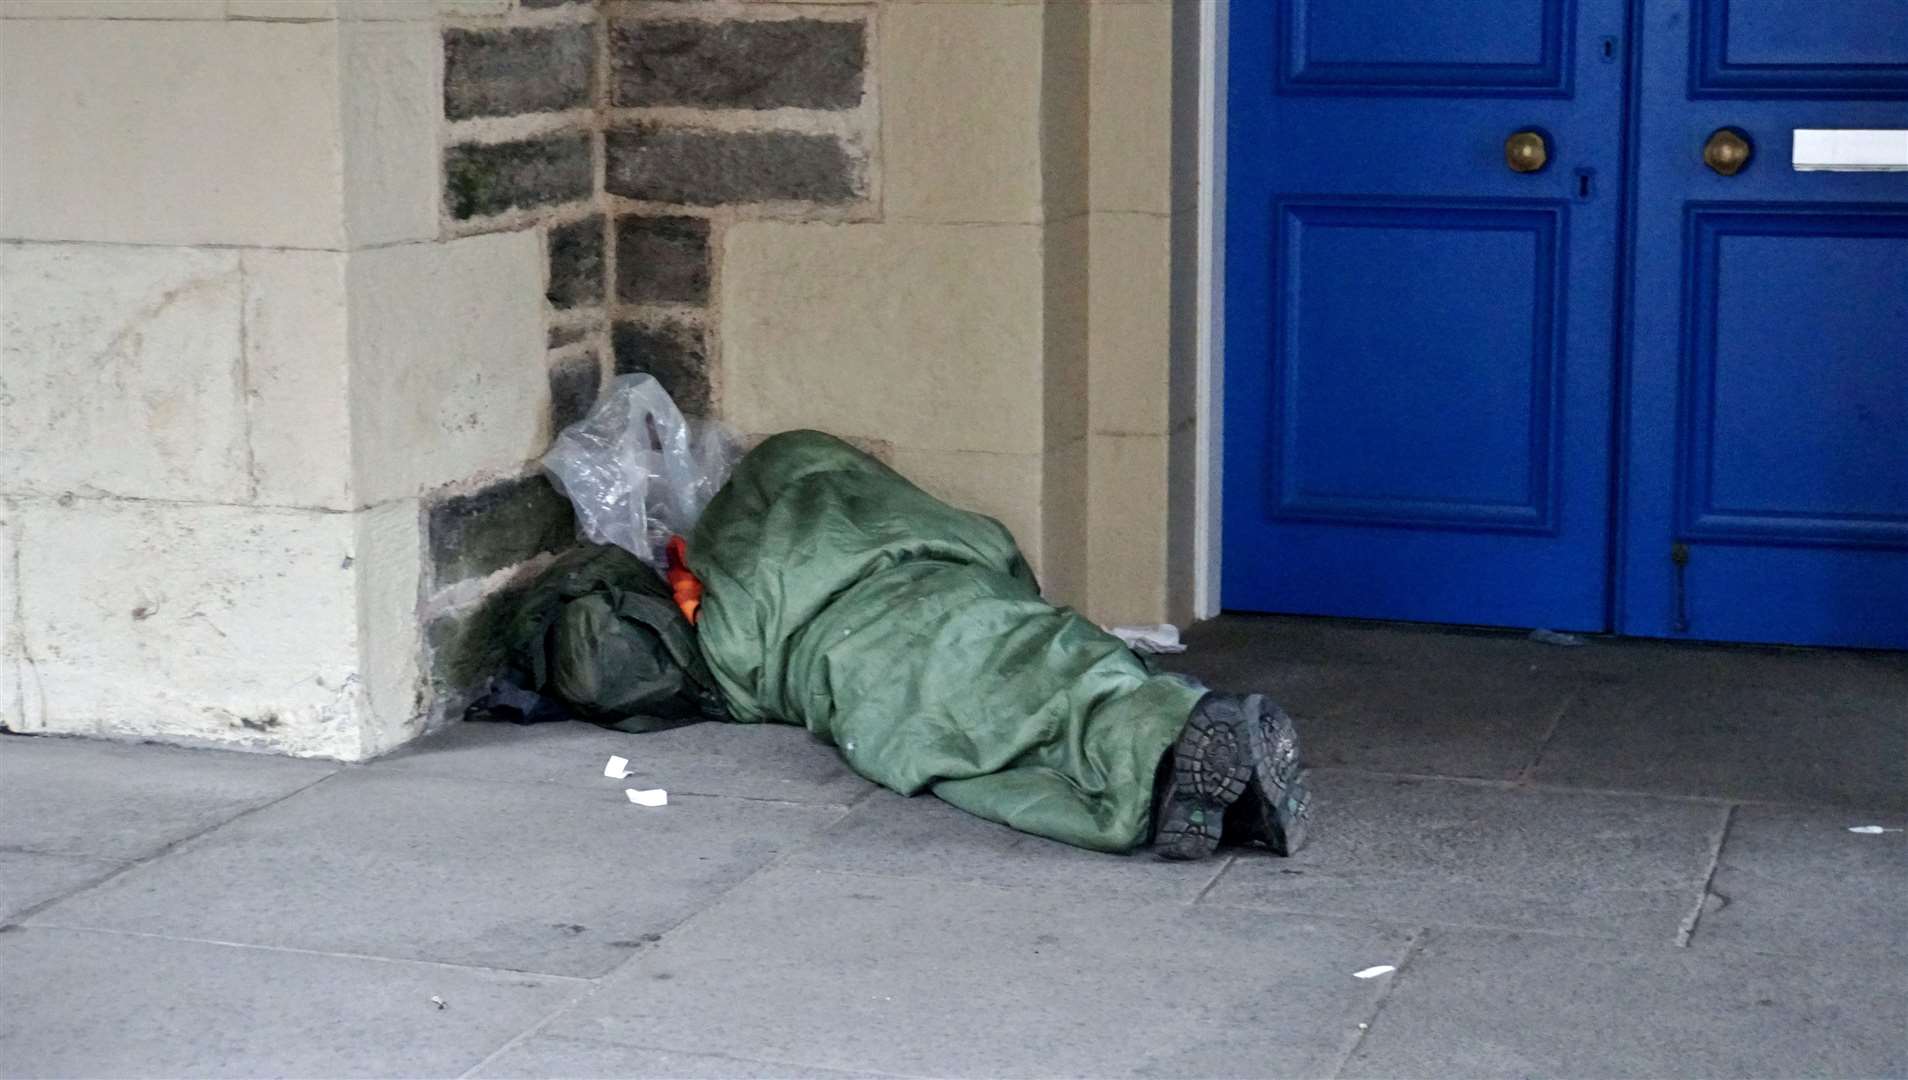 More people could be pushed into homelessness by the cost of lving crisis, a charity has warned. Picture: DGS